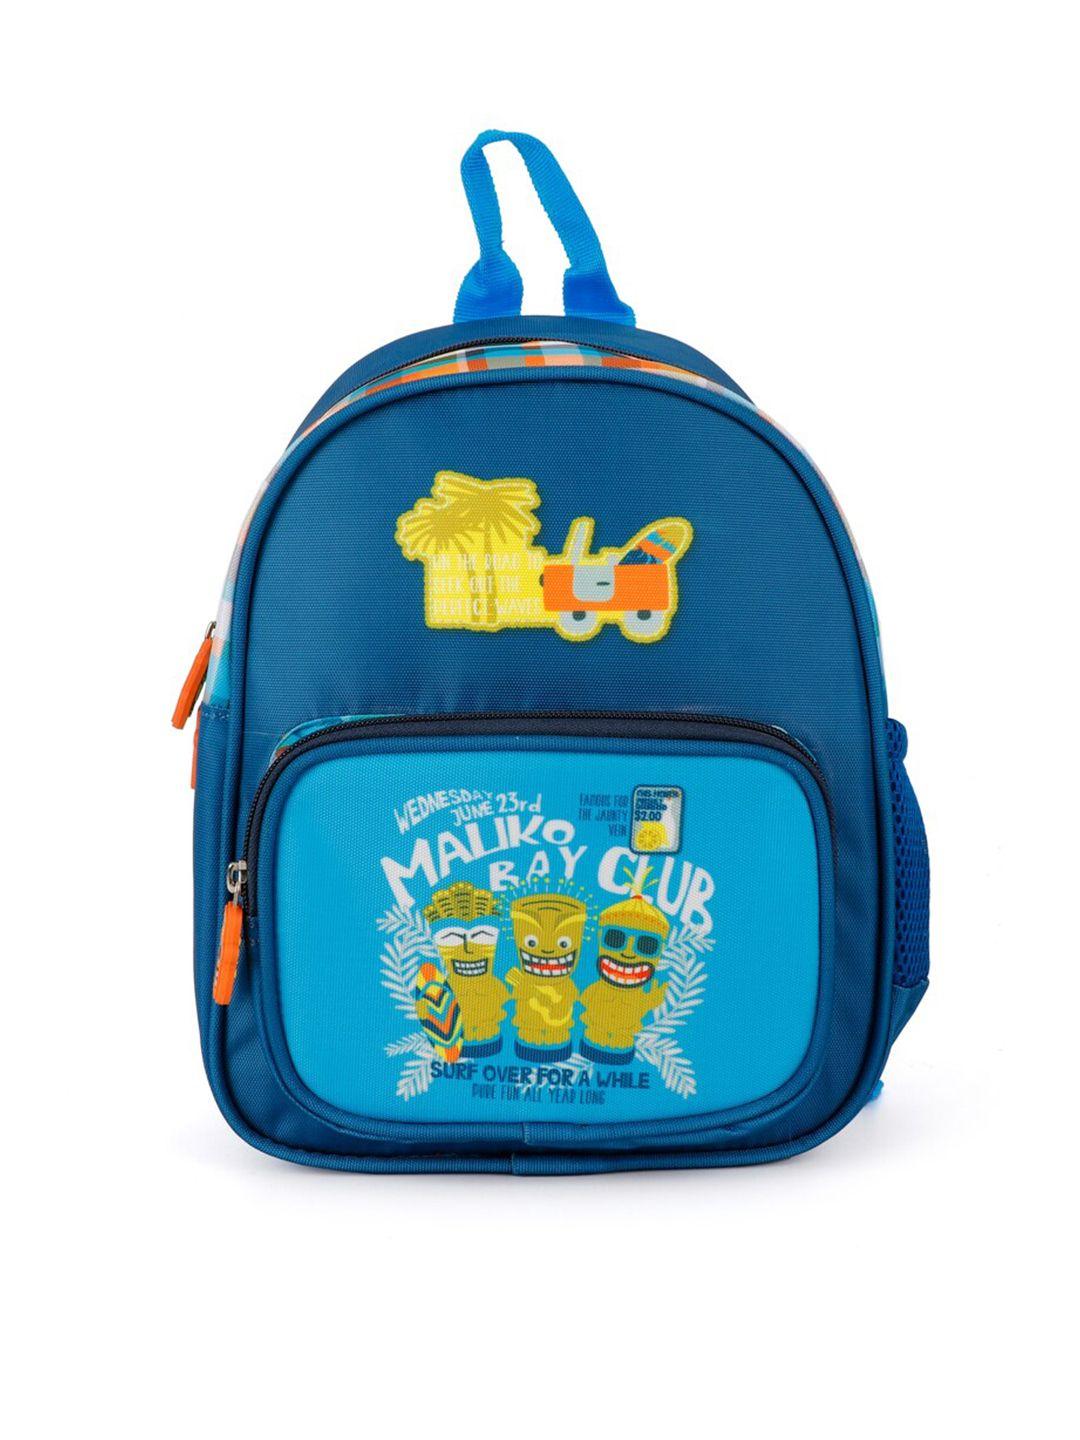 qips boys navy blue & yellow graphic backpack